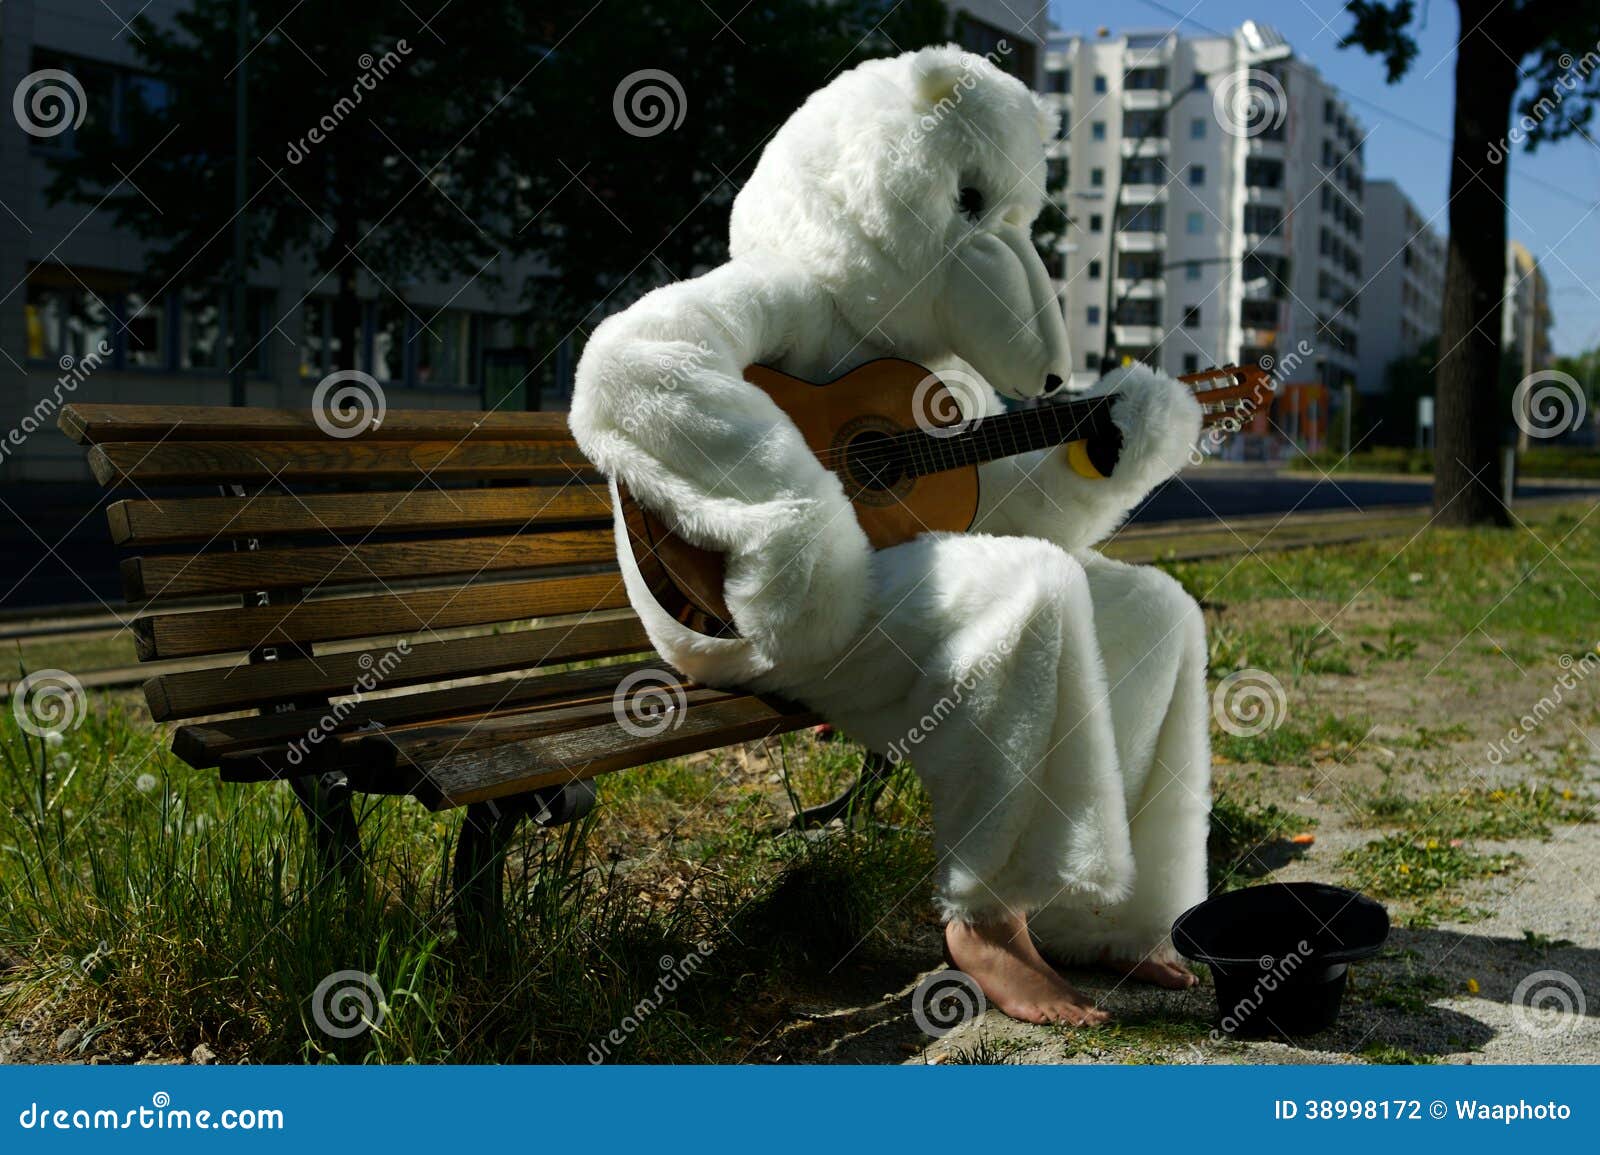 busker street performer in bear suit playing guitar